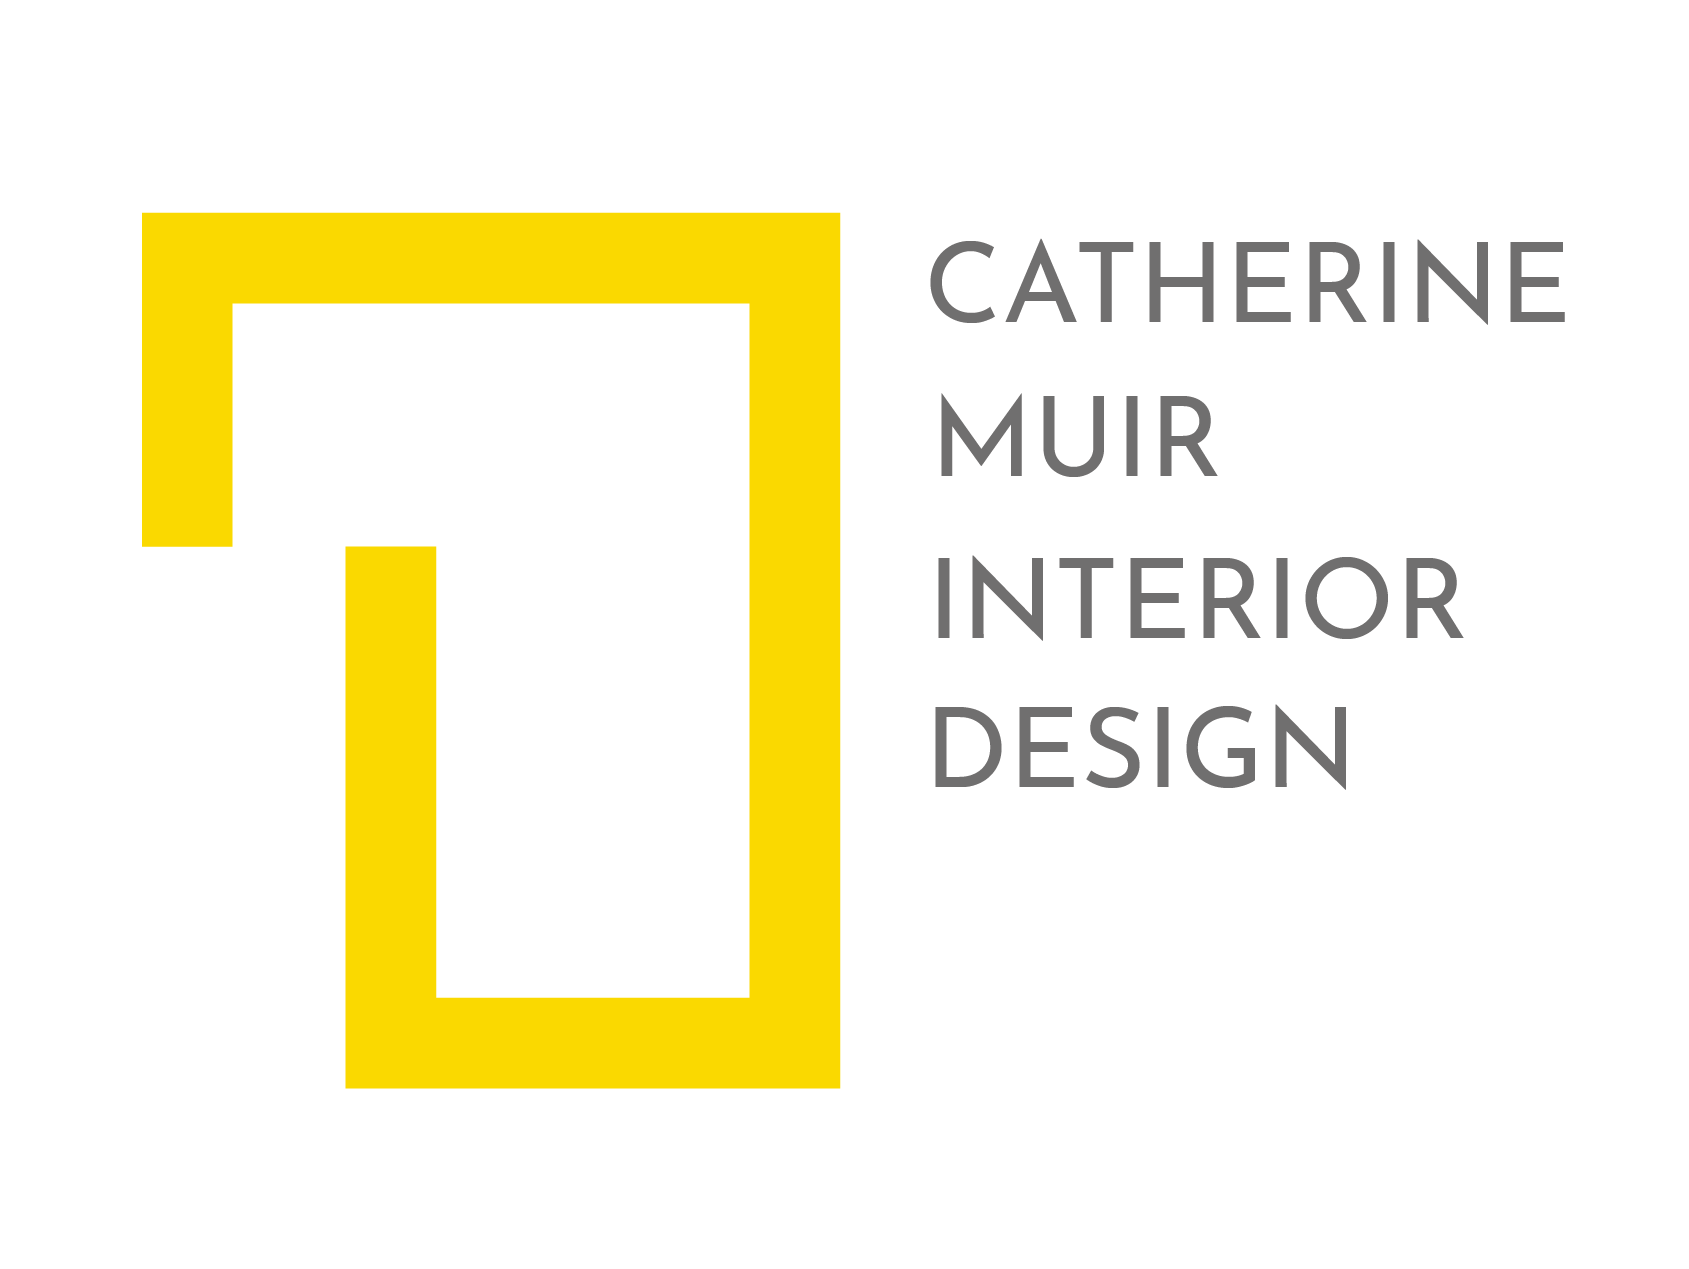 Catherine Muir Interior Design logo design by logo designer Anna Brand Creative Ltd for your inspiration and for the worlds largest logo competition